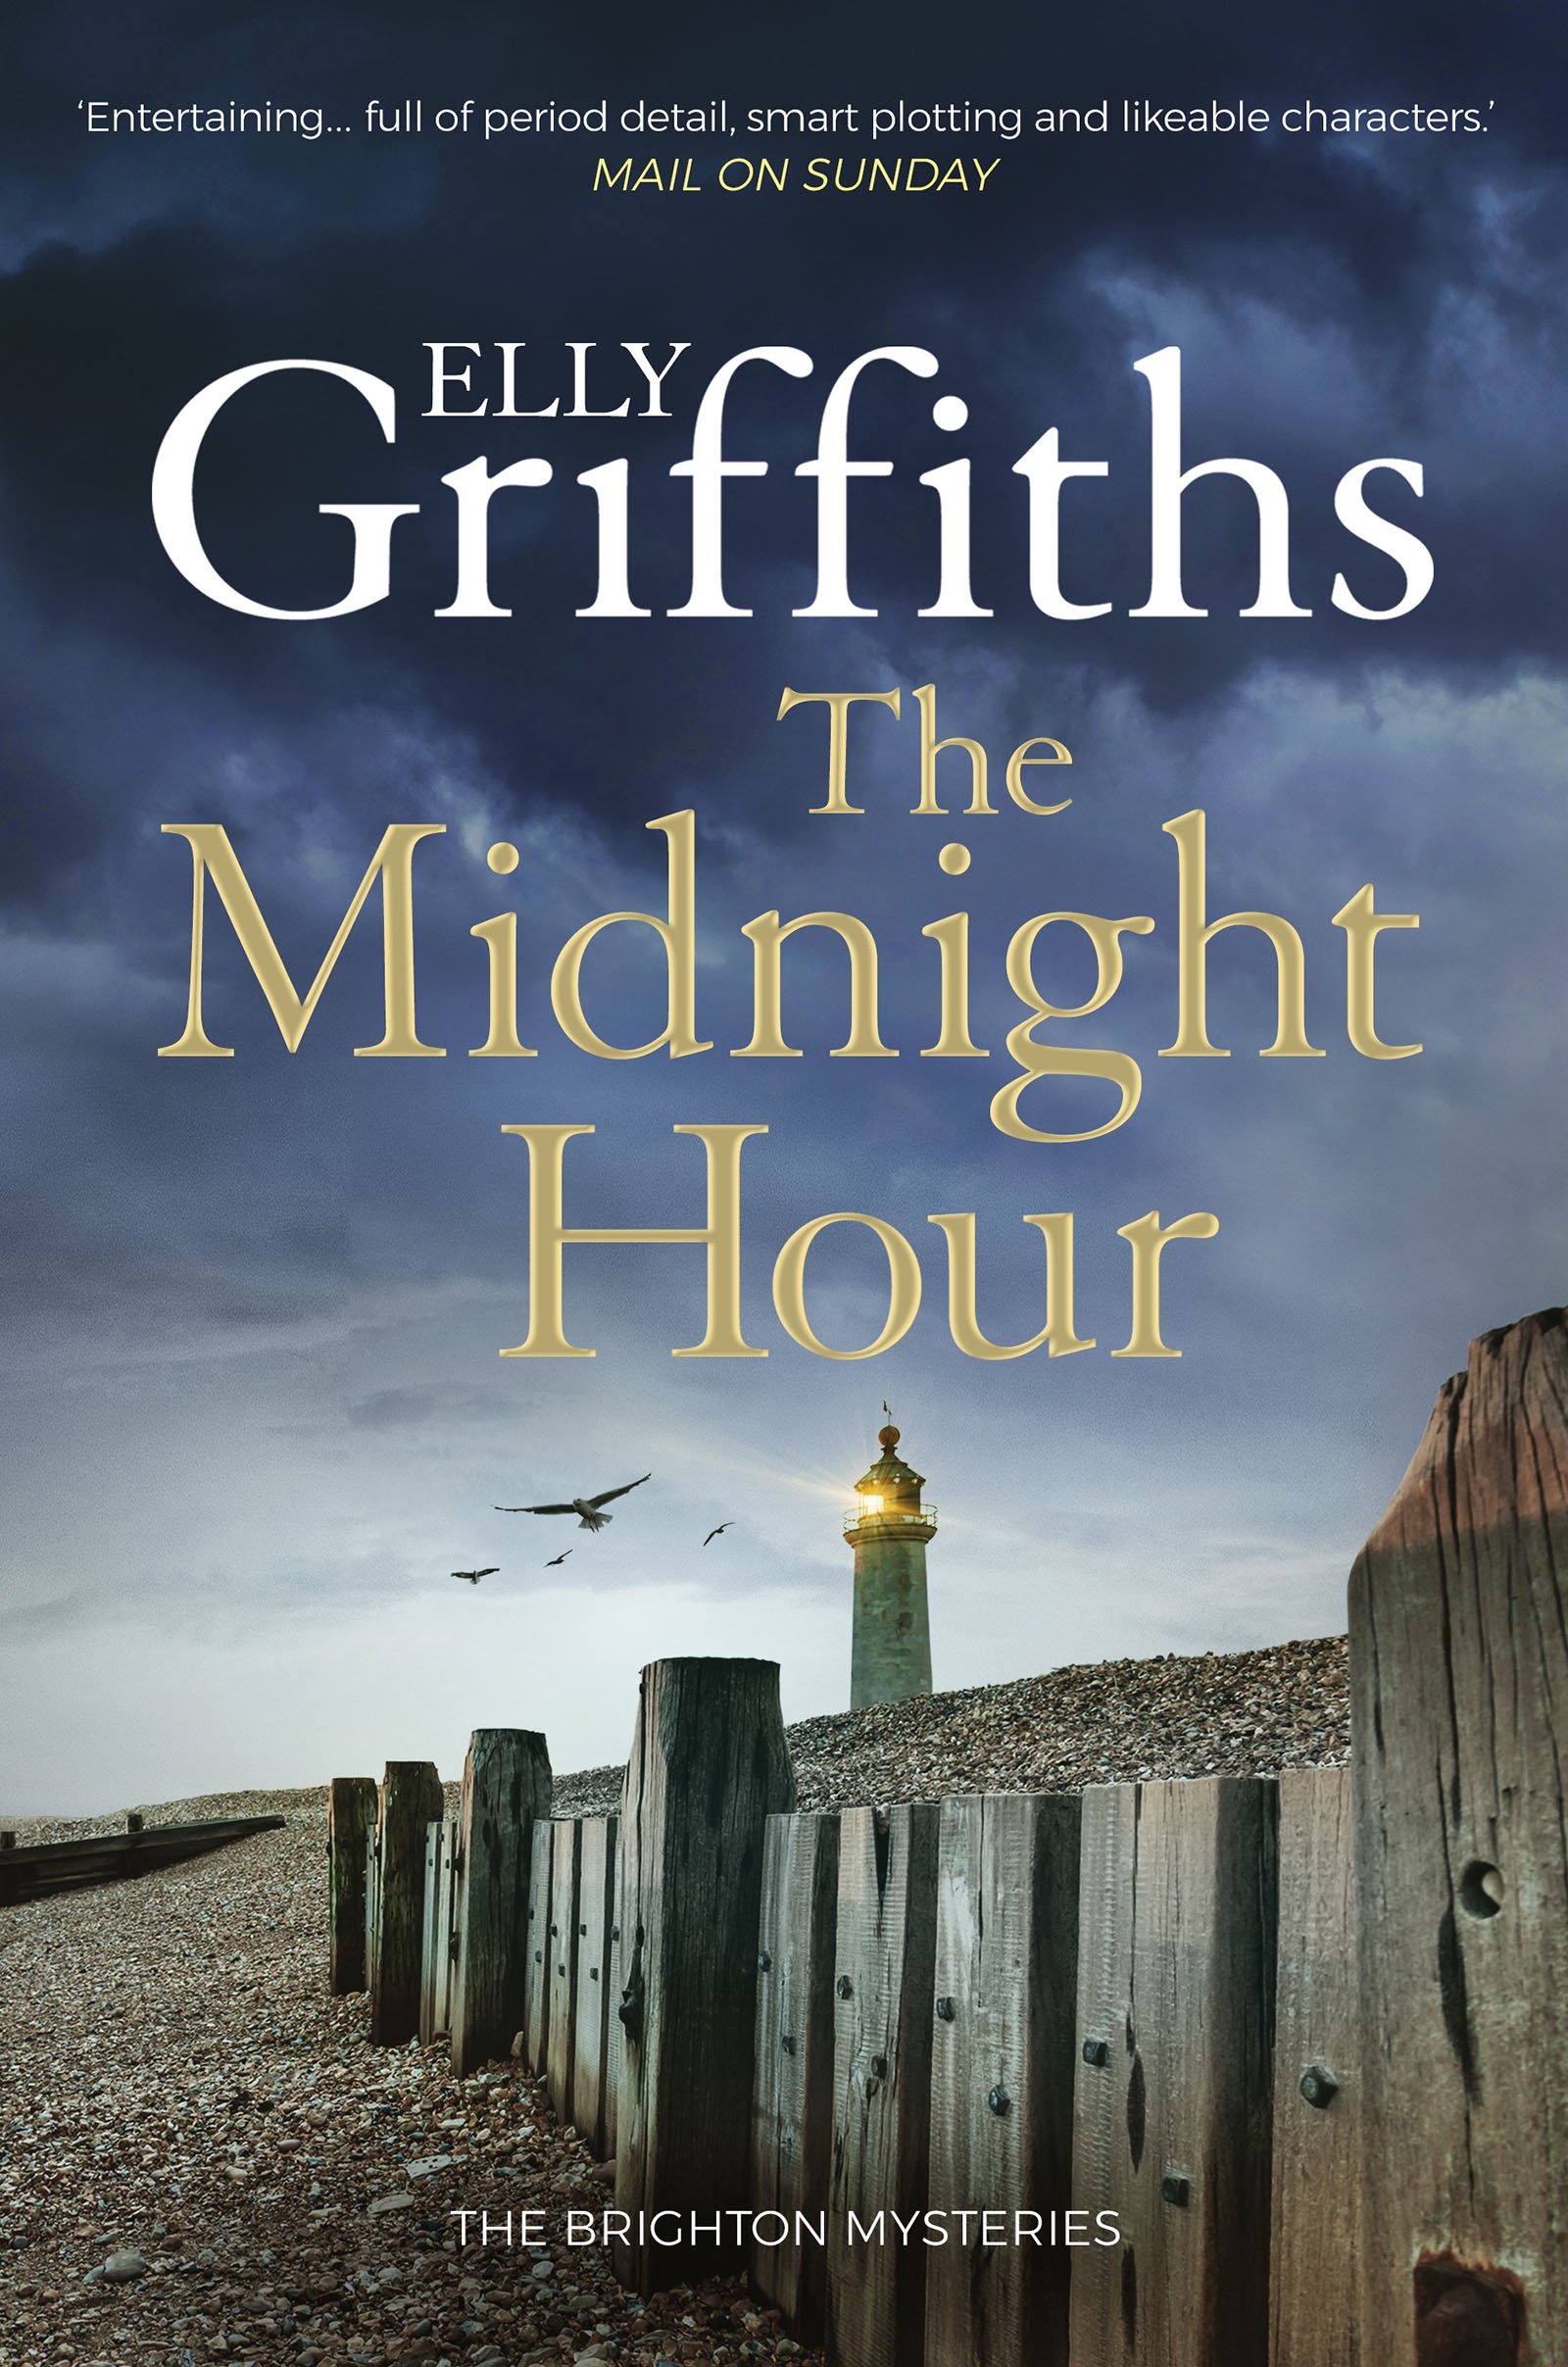 The Midnight Hour book cover image